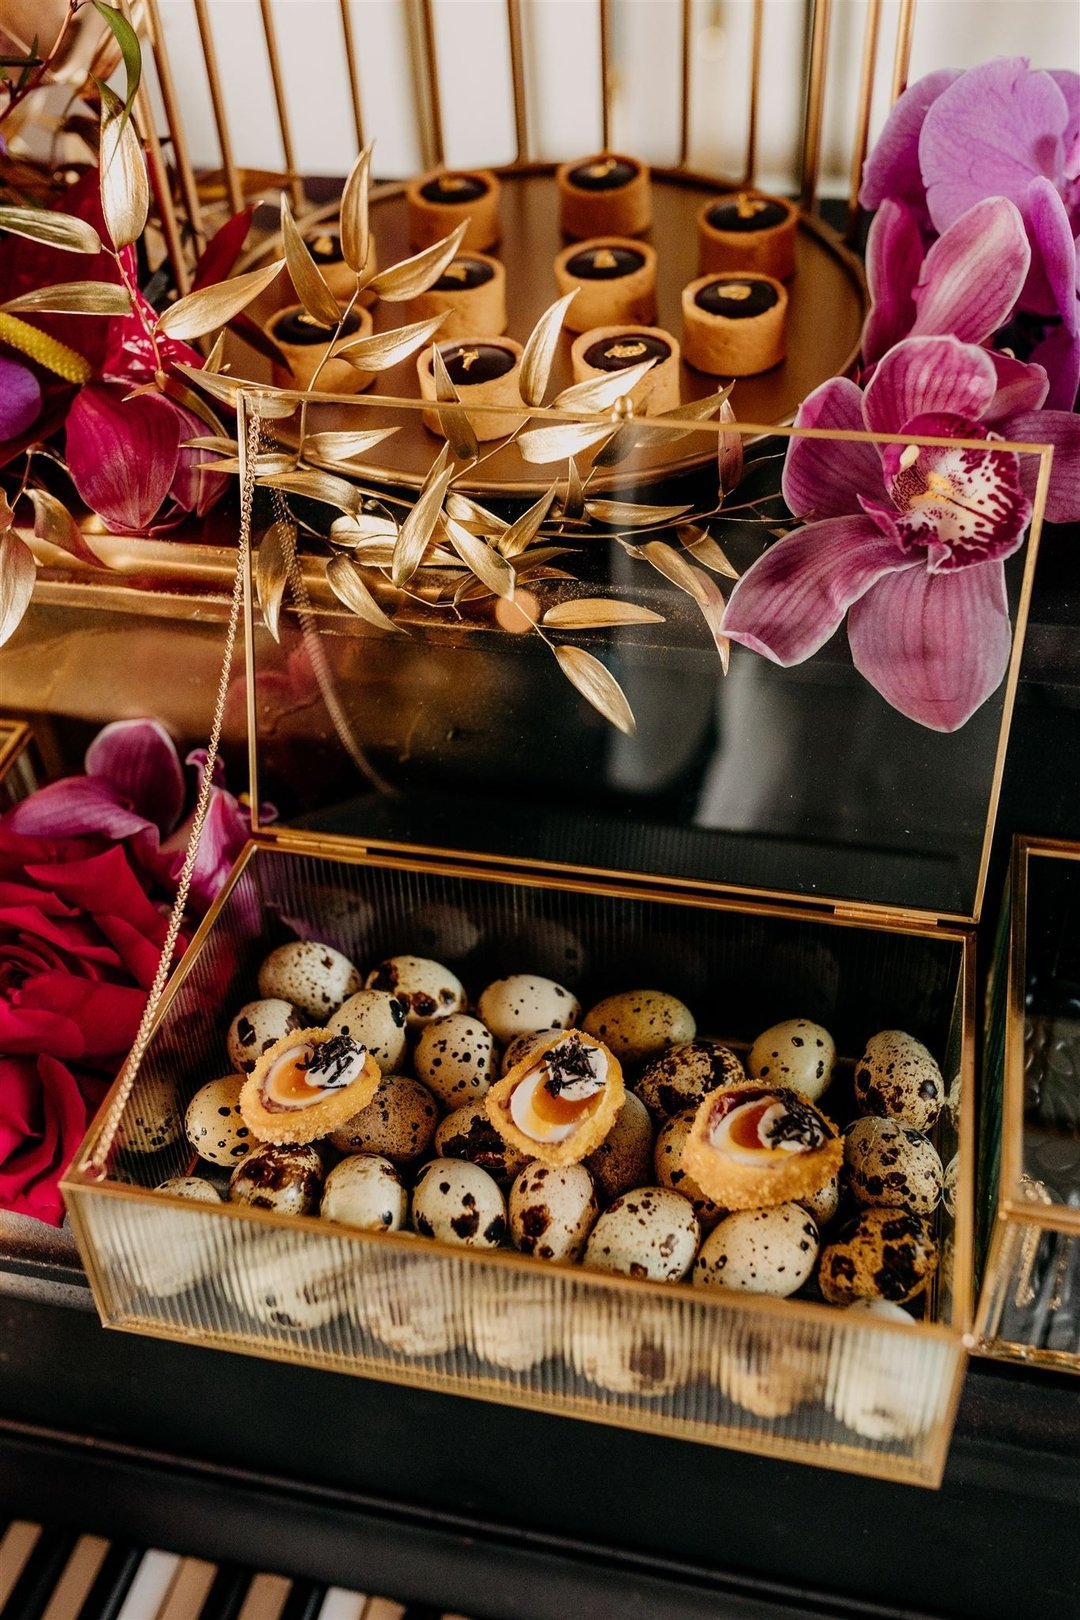 New to our canapes menu...Scotch Quail Eggs!
crispy quail egg, proscuitto, truffled aioli
..
It's perfection in one bite.
..
events@edgecatering.ca
..
Photography: @aileenchoiphoto
Floral: @flowerfactory 
Decor: @social_ingredients 
Venue: @thewallac